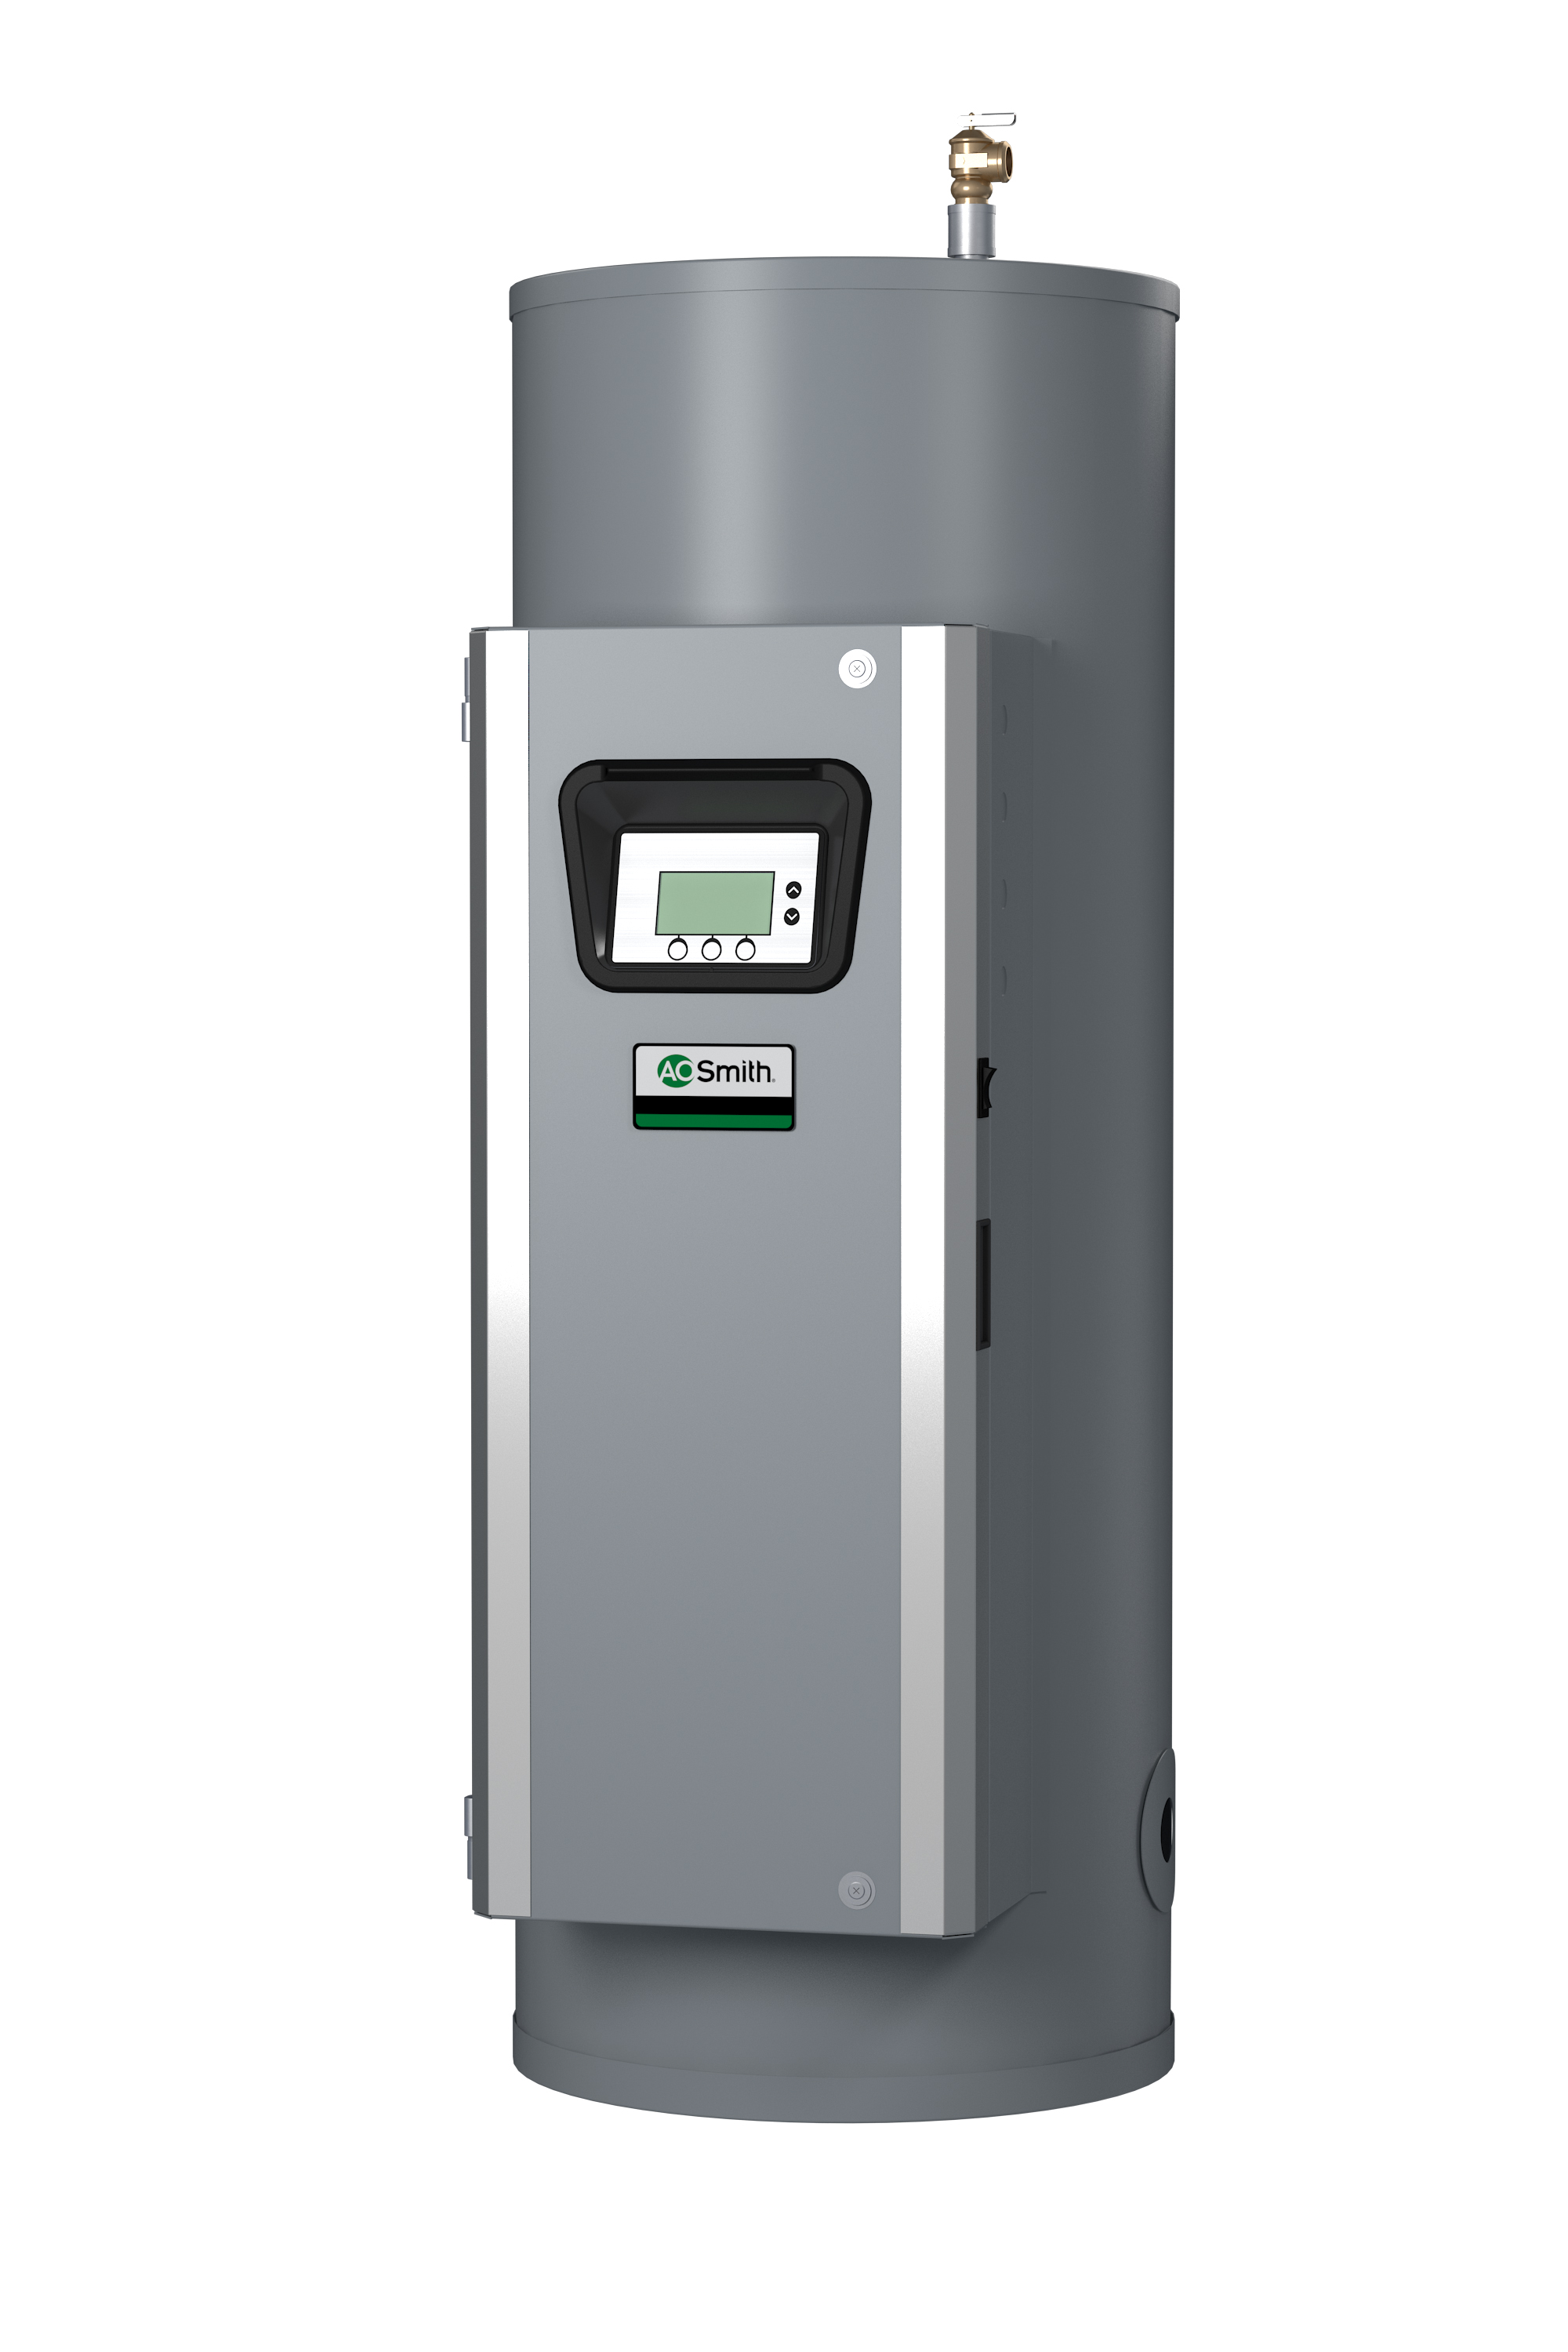 AO SMITH DSE-100A-24, 100 GALLONS, 24KW, 240 VOLT, 57.7 AMPS, 3 PHASE, 2 ELEMENTS, ASME CUSTOM Xi SERIES HEAVY DUTY COMMERCIAL ELECTRIC WATER HEATER